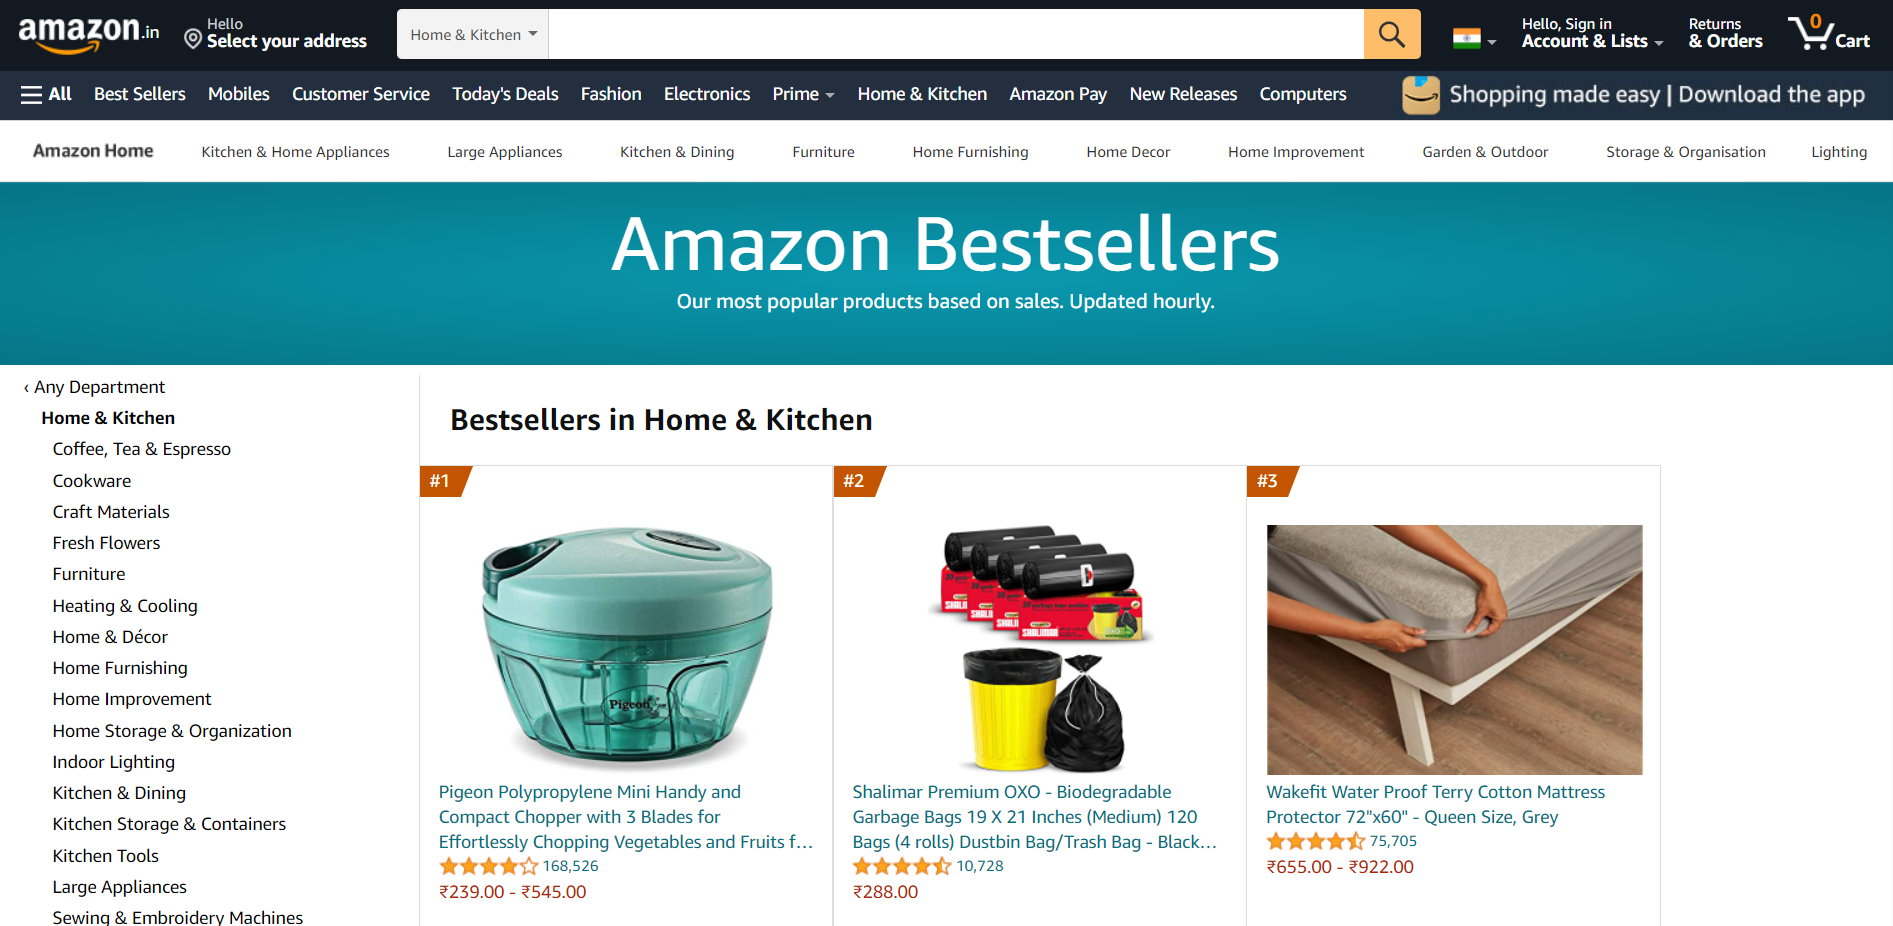 Amazon’s bestsellers page